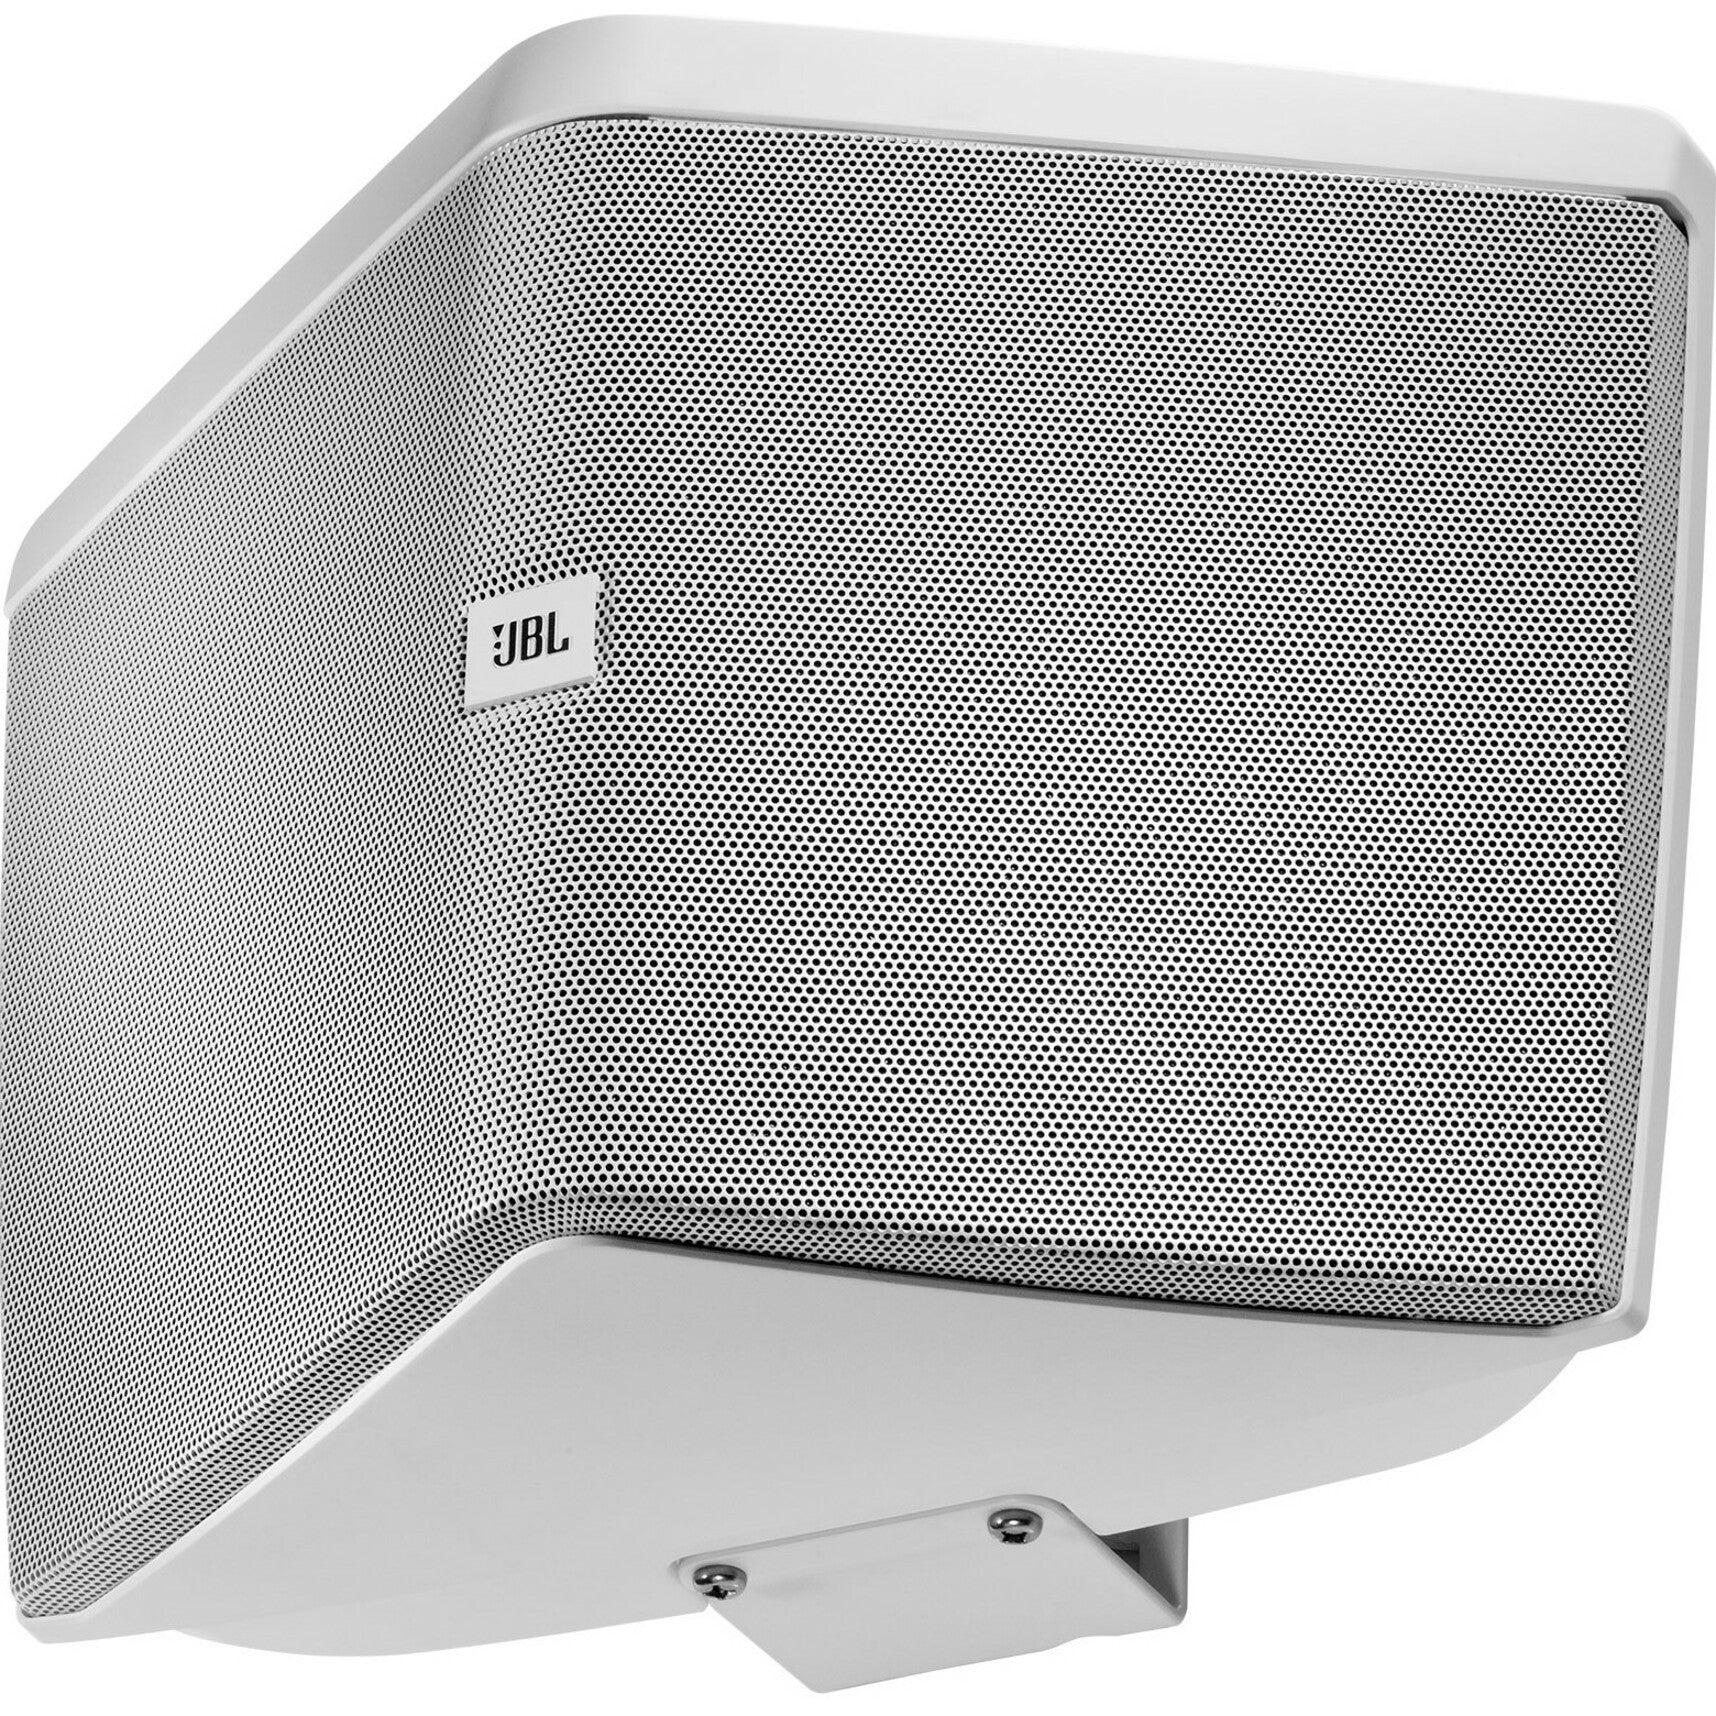 JBL CONTROL HST-WH Wide-Coverage Speaker With 5-1/4" LF, Dual Tweeters And HST Technology, 100W RMS, White